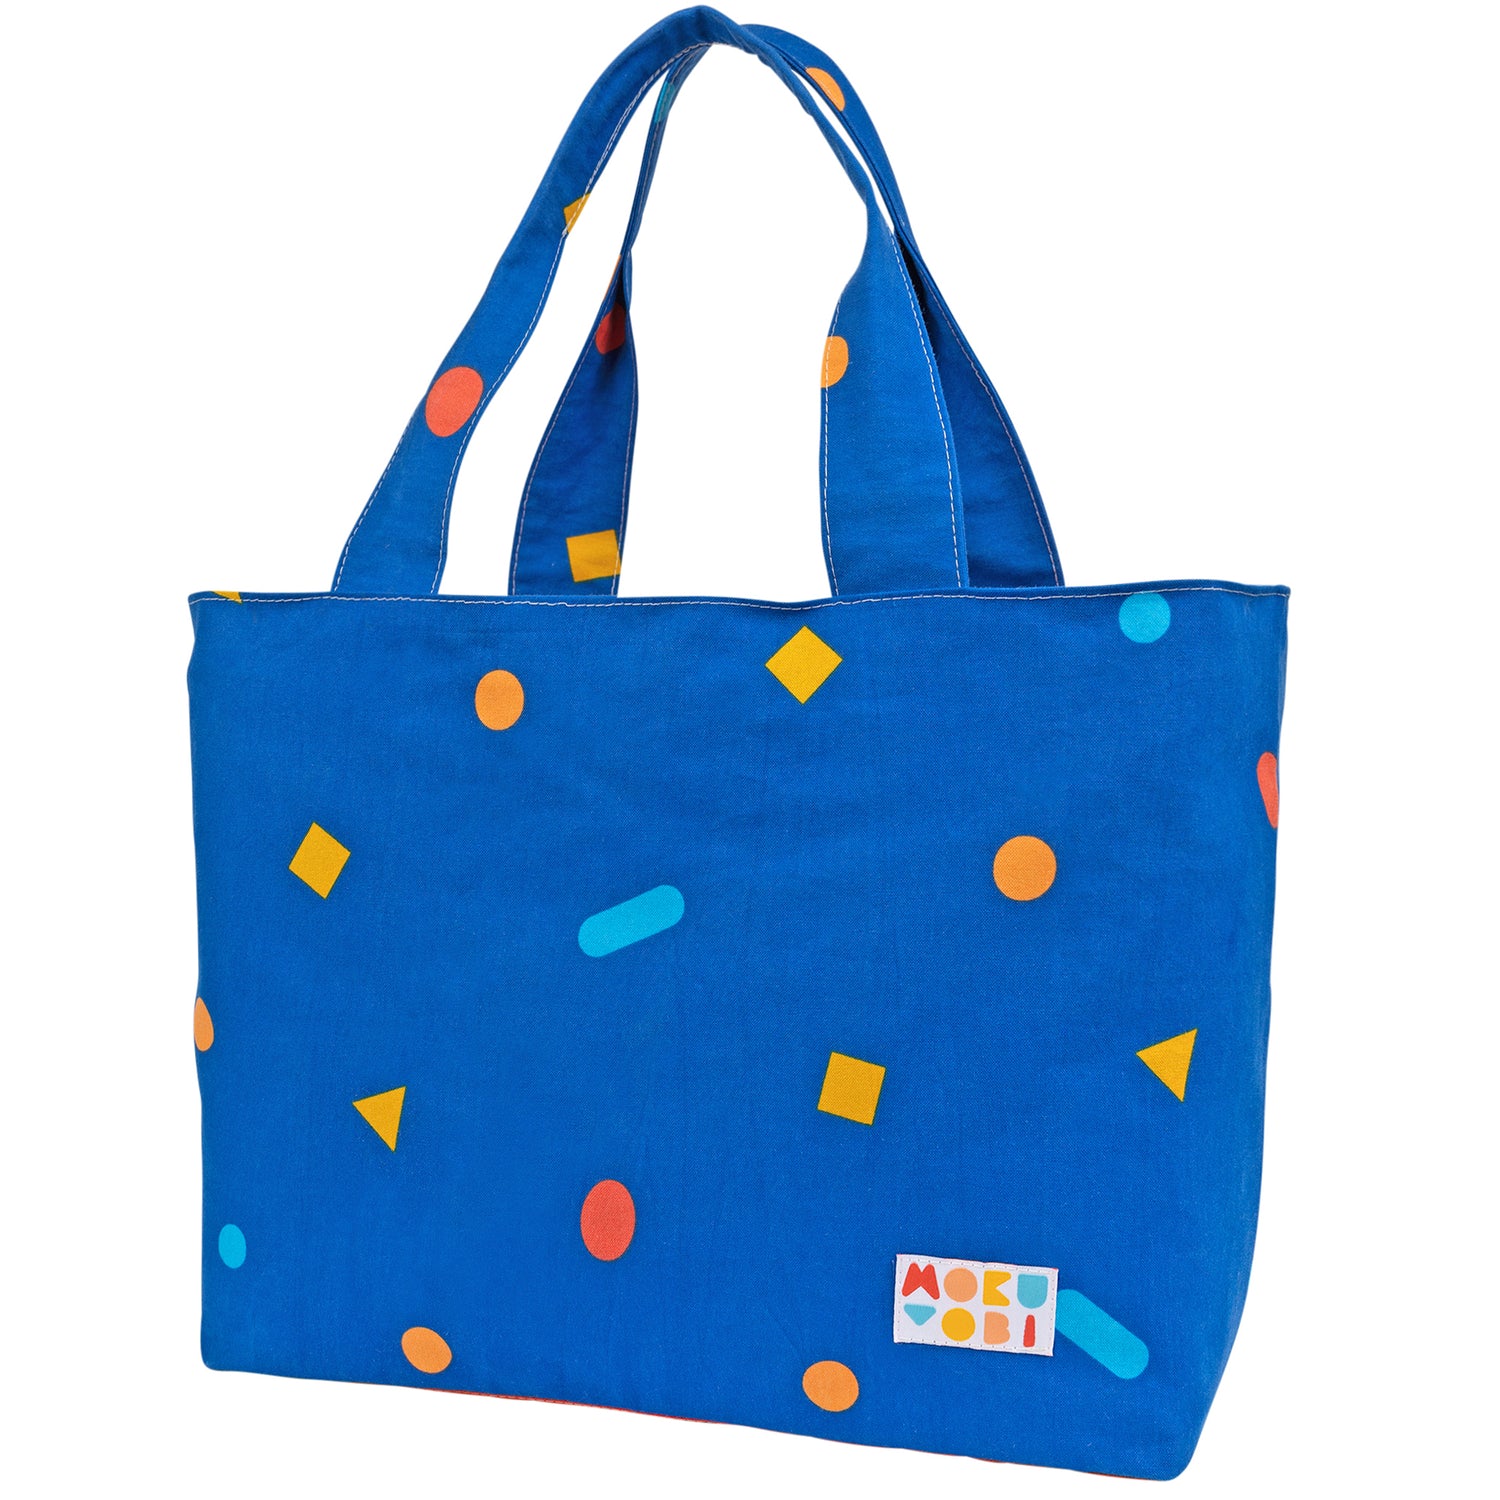 Large blue tote bag with small colorful designs